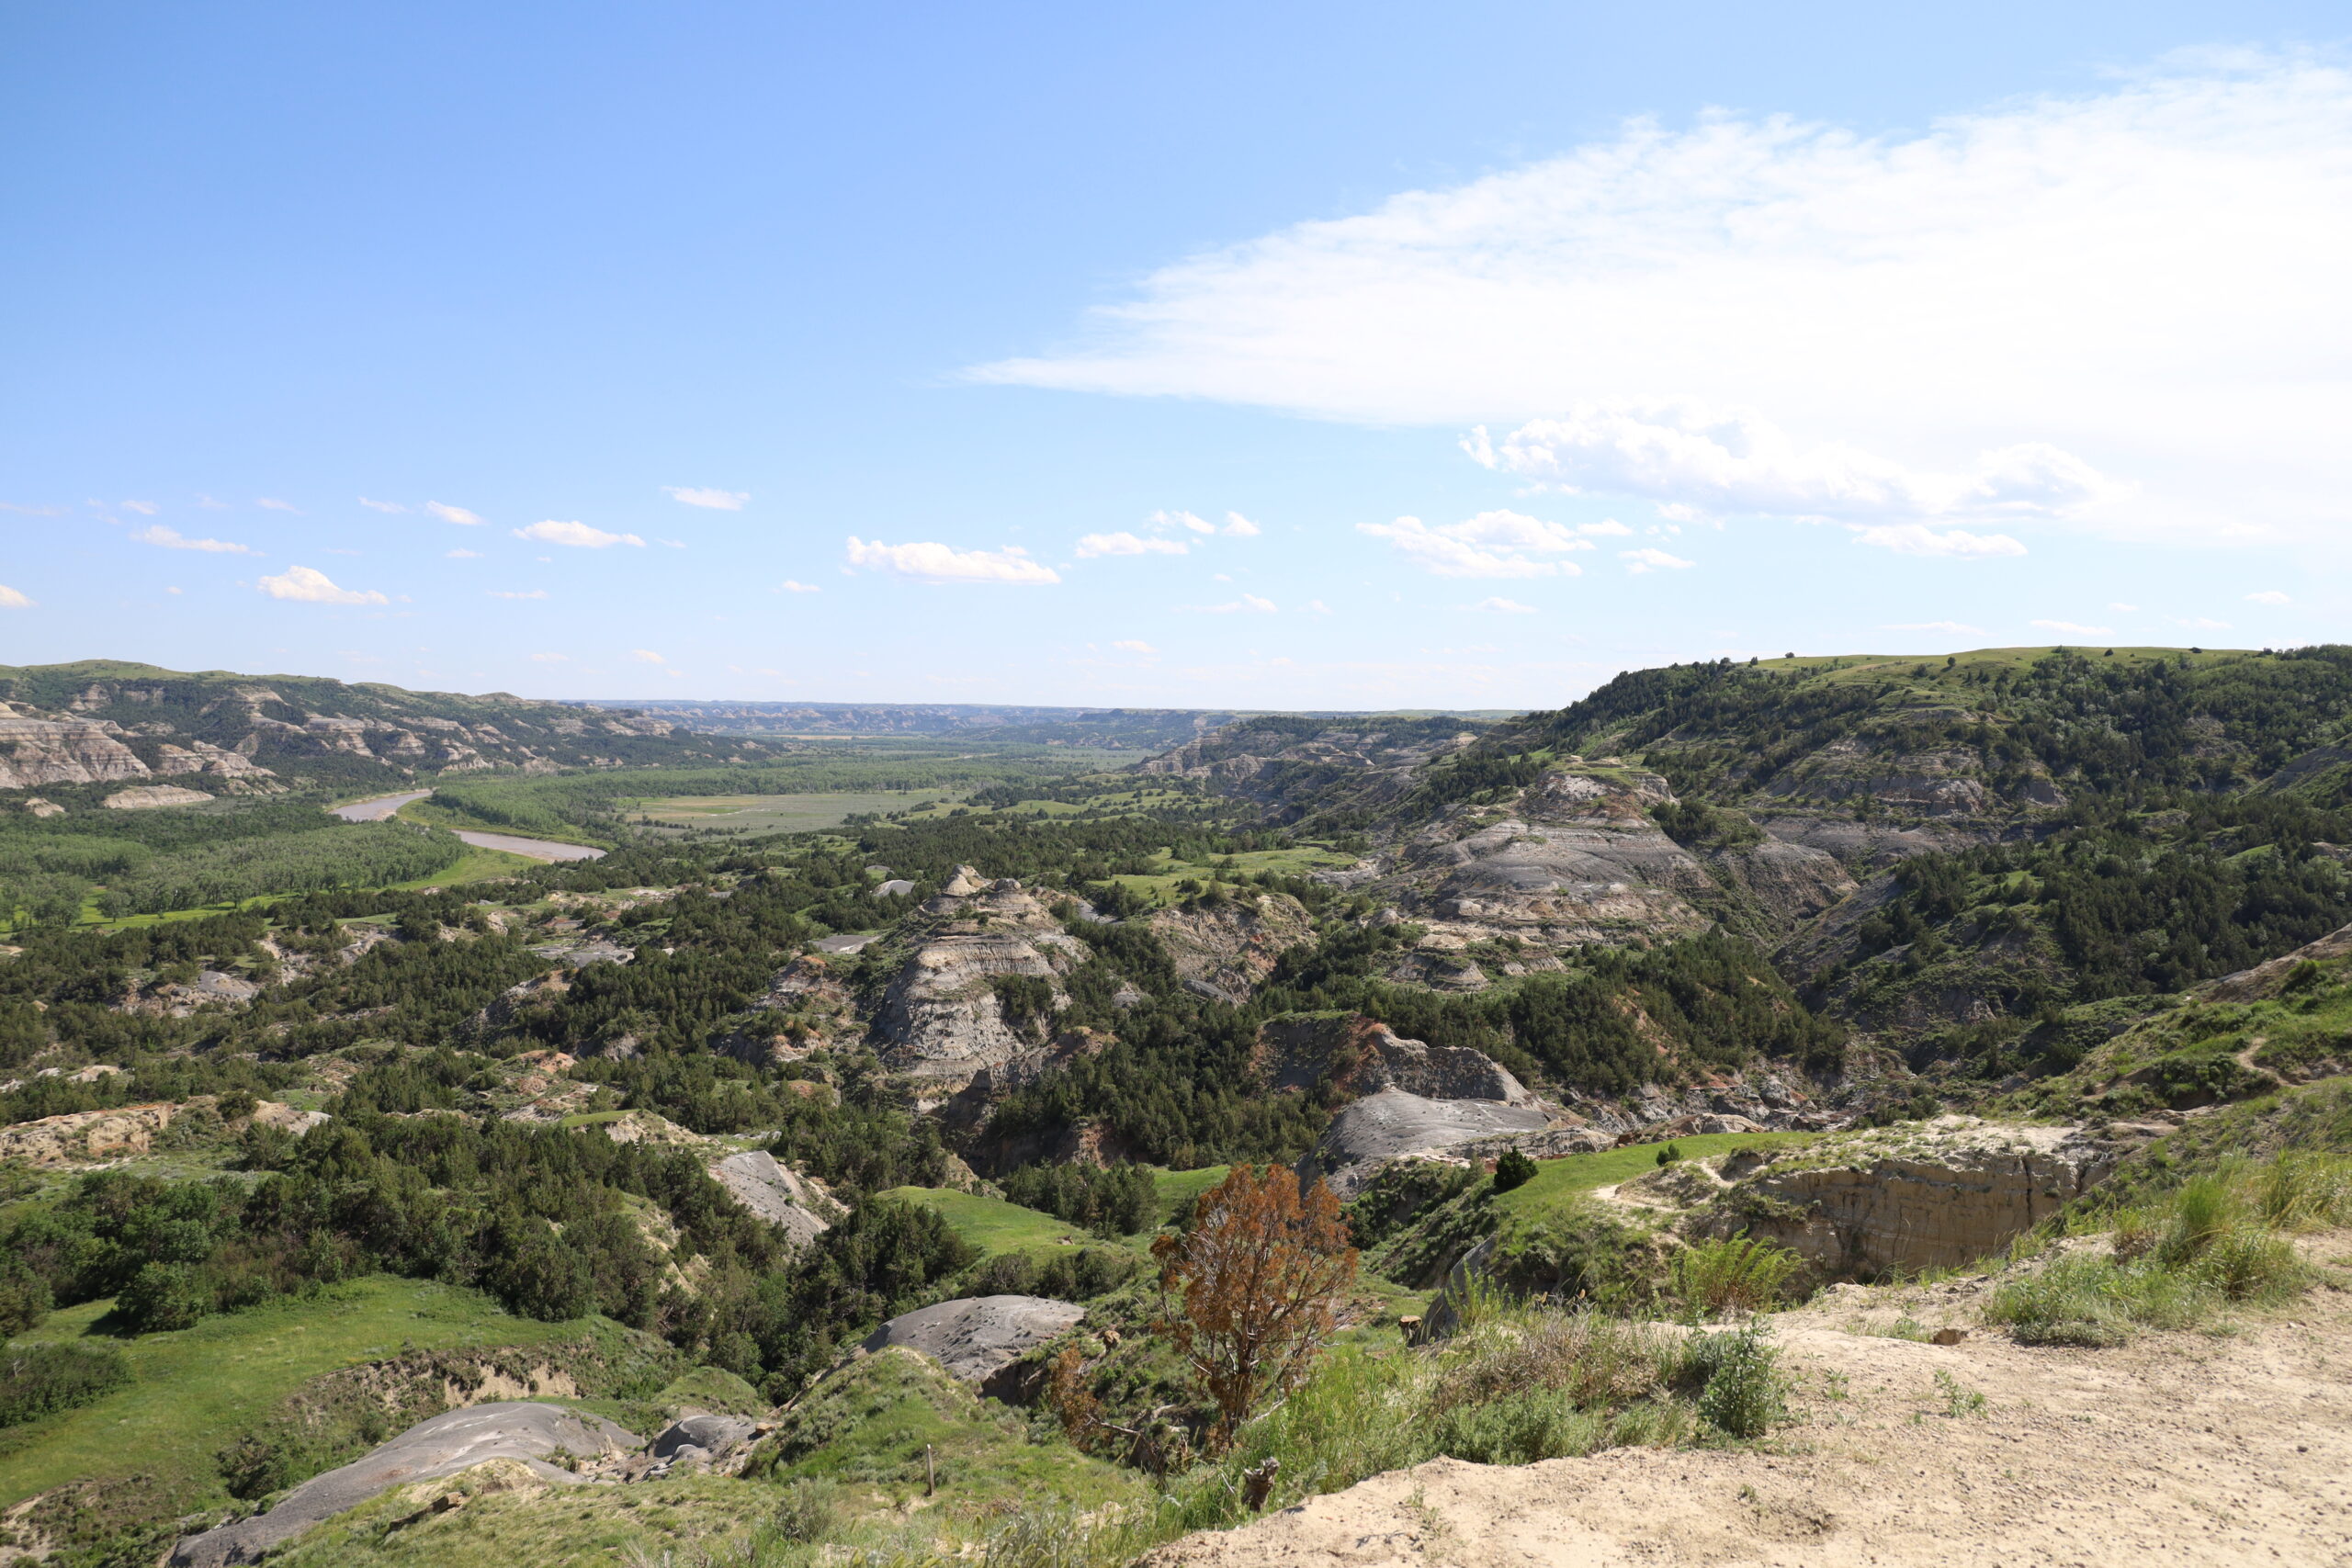 Visiting Teddy Roosevelt National Park: Scenes of Beautiful Buttes